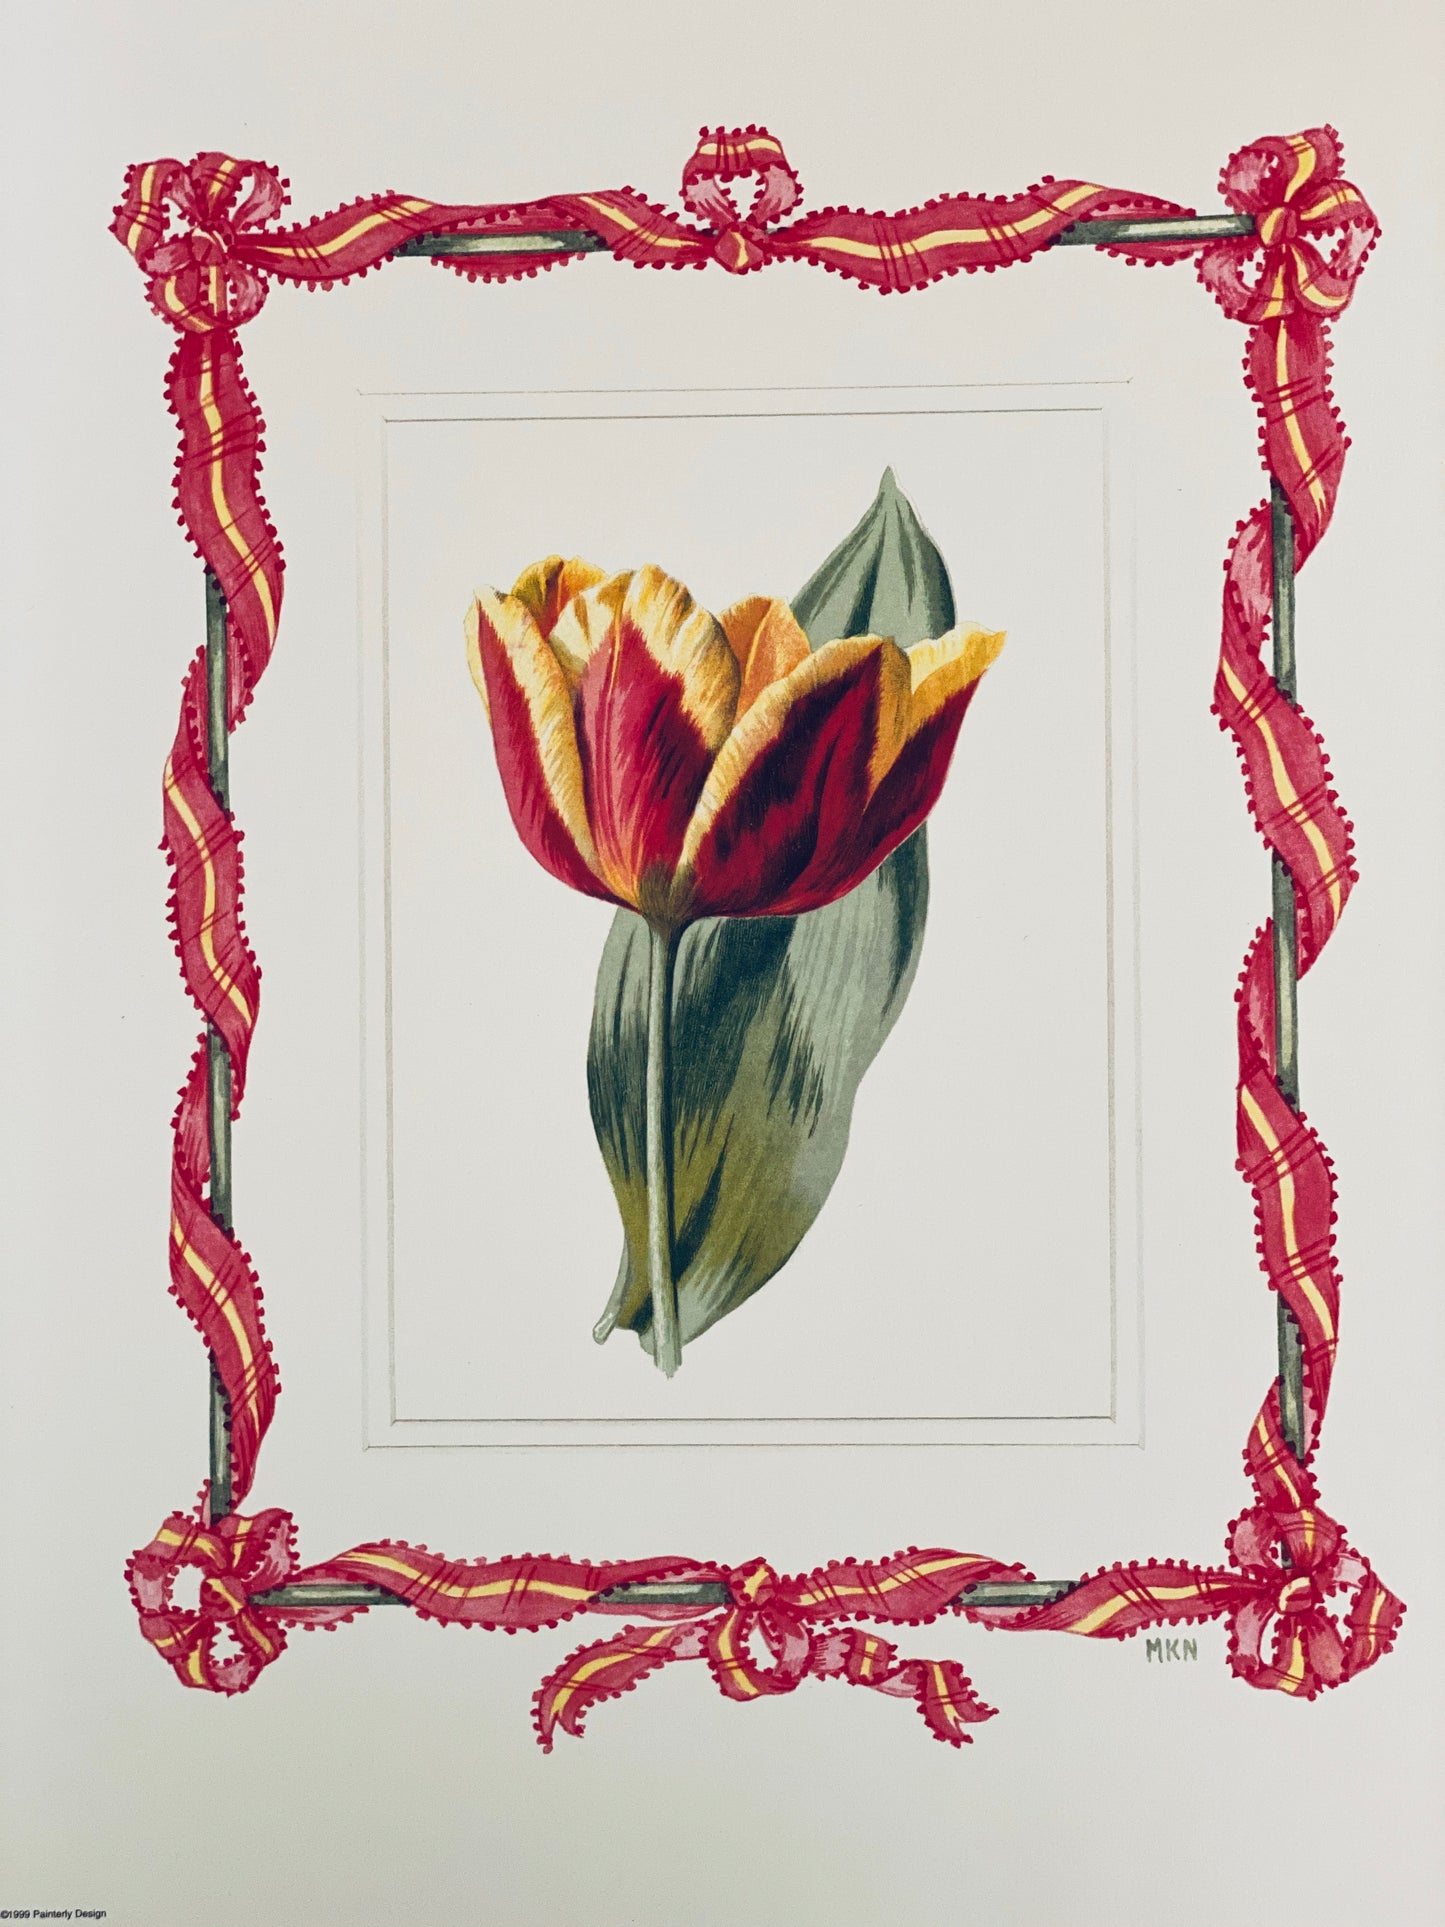 Red tulip antique print with hand-painted ribbon border